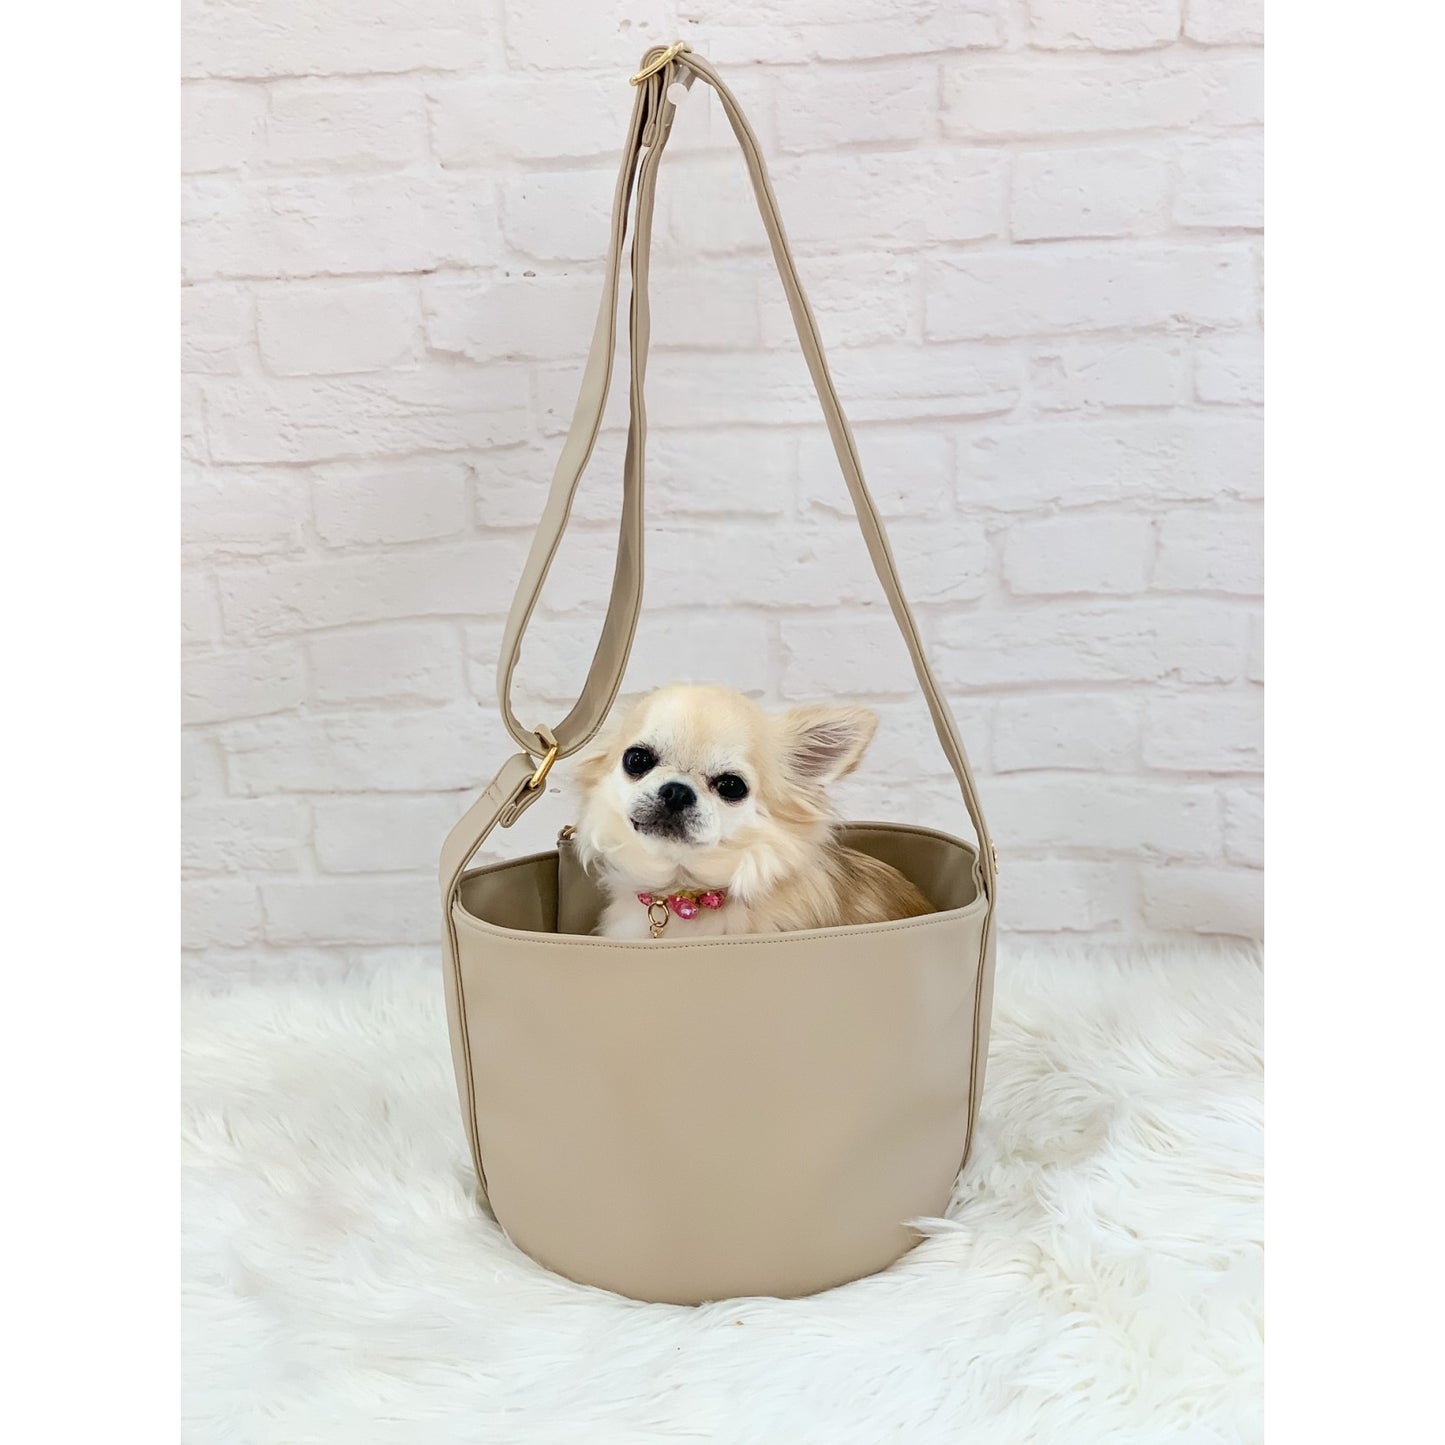  For Pets Only Sac Seau Greige